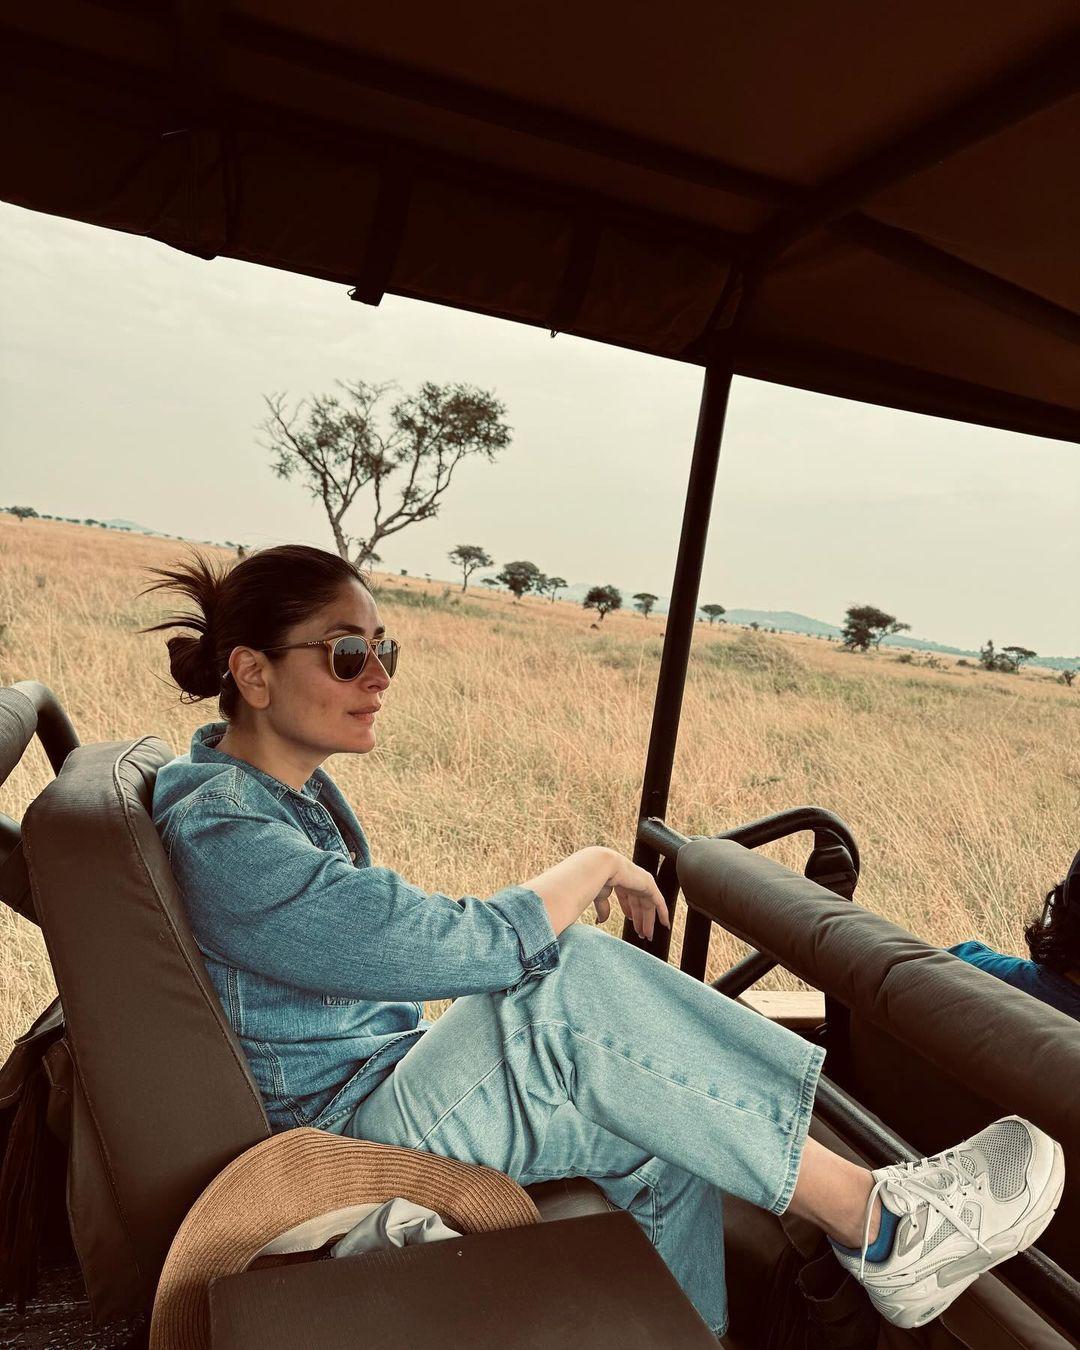 Kareena threw boss lady vibes as she posed for a picture sitting on a jeep